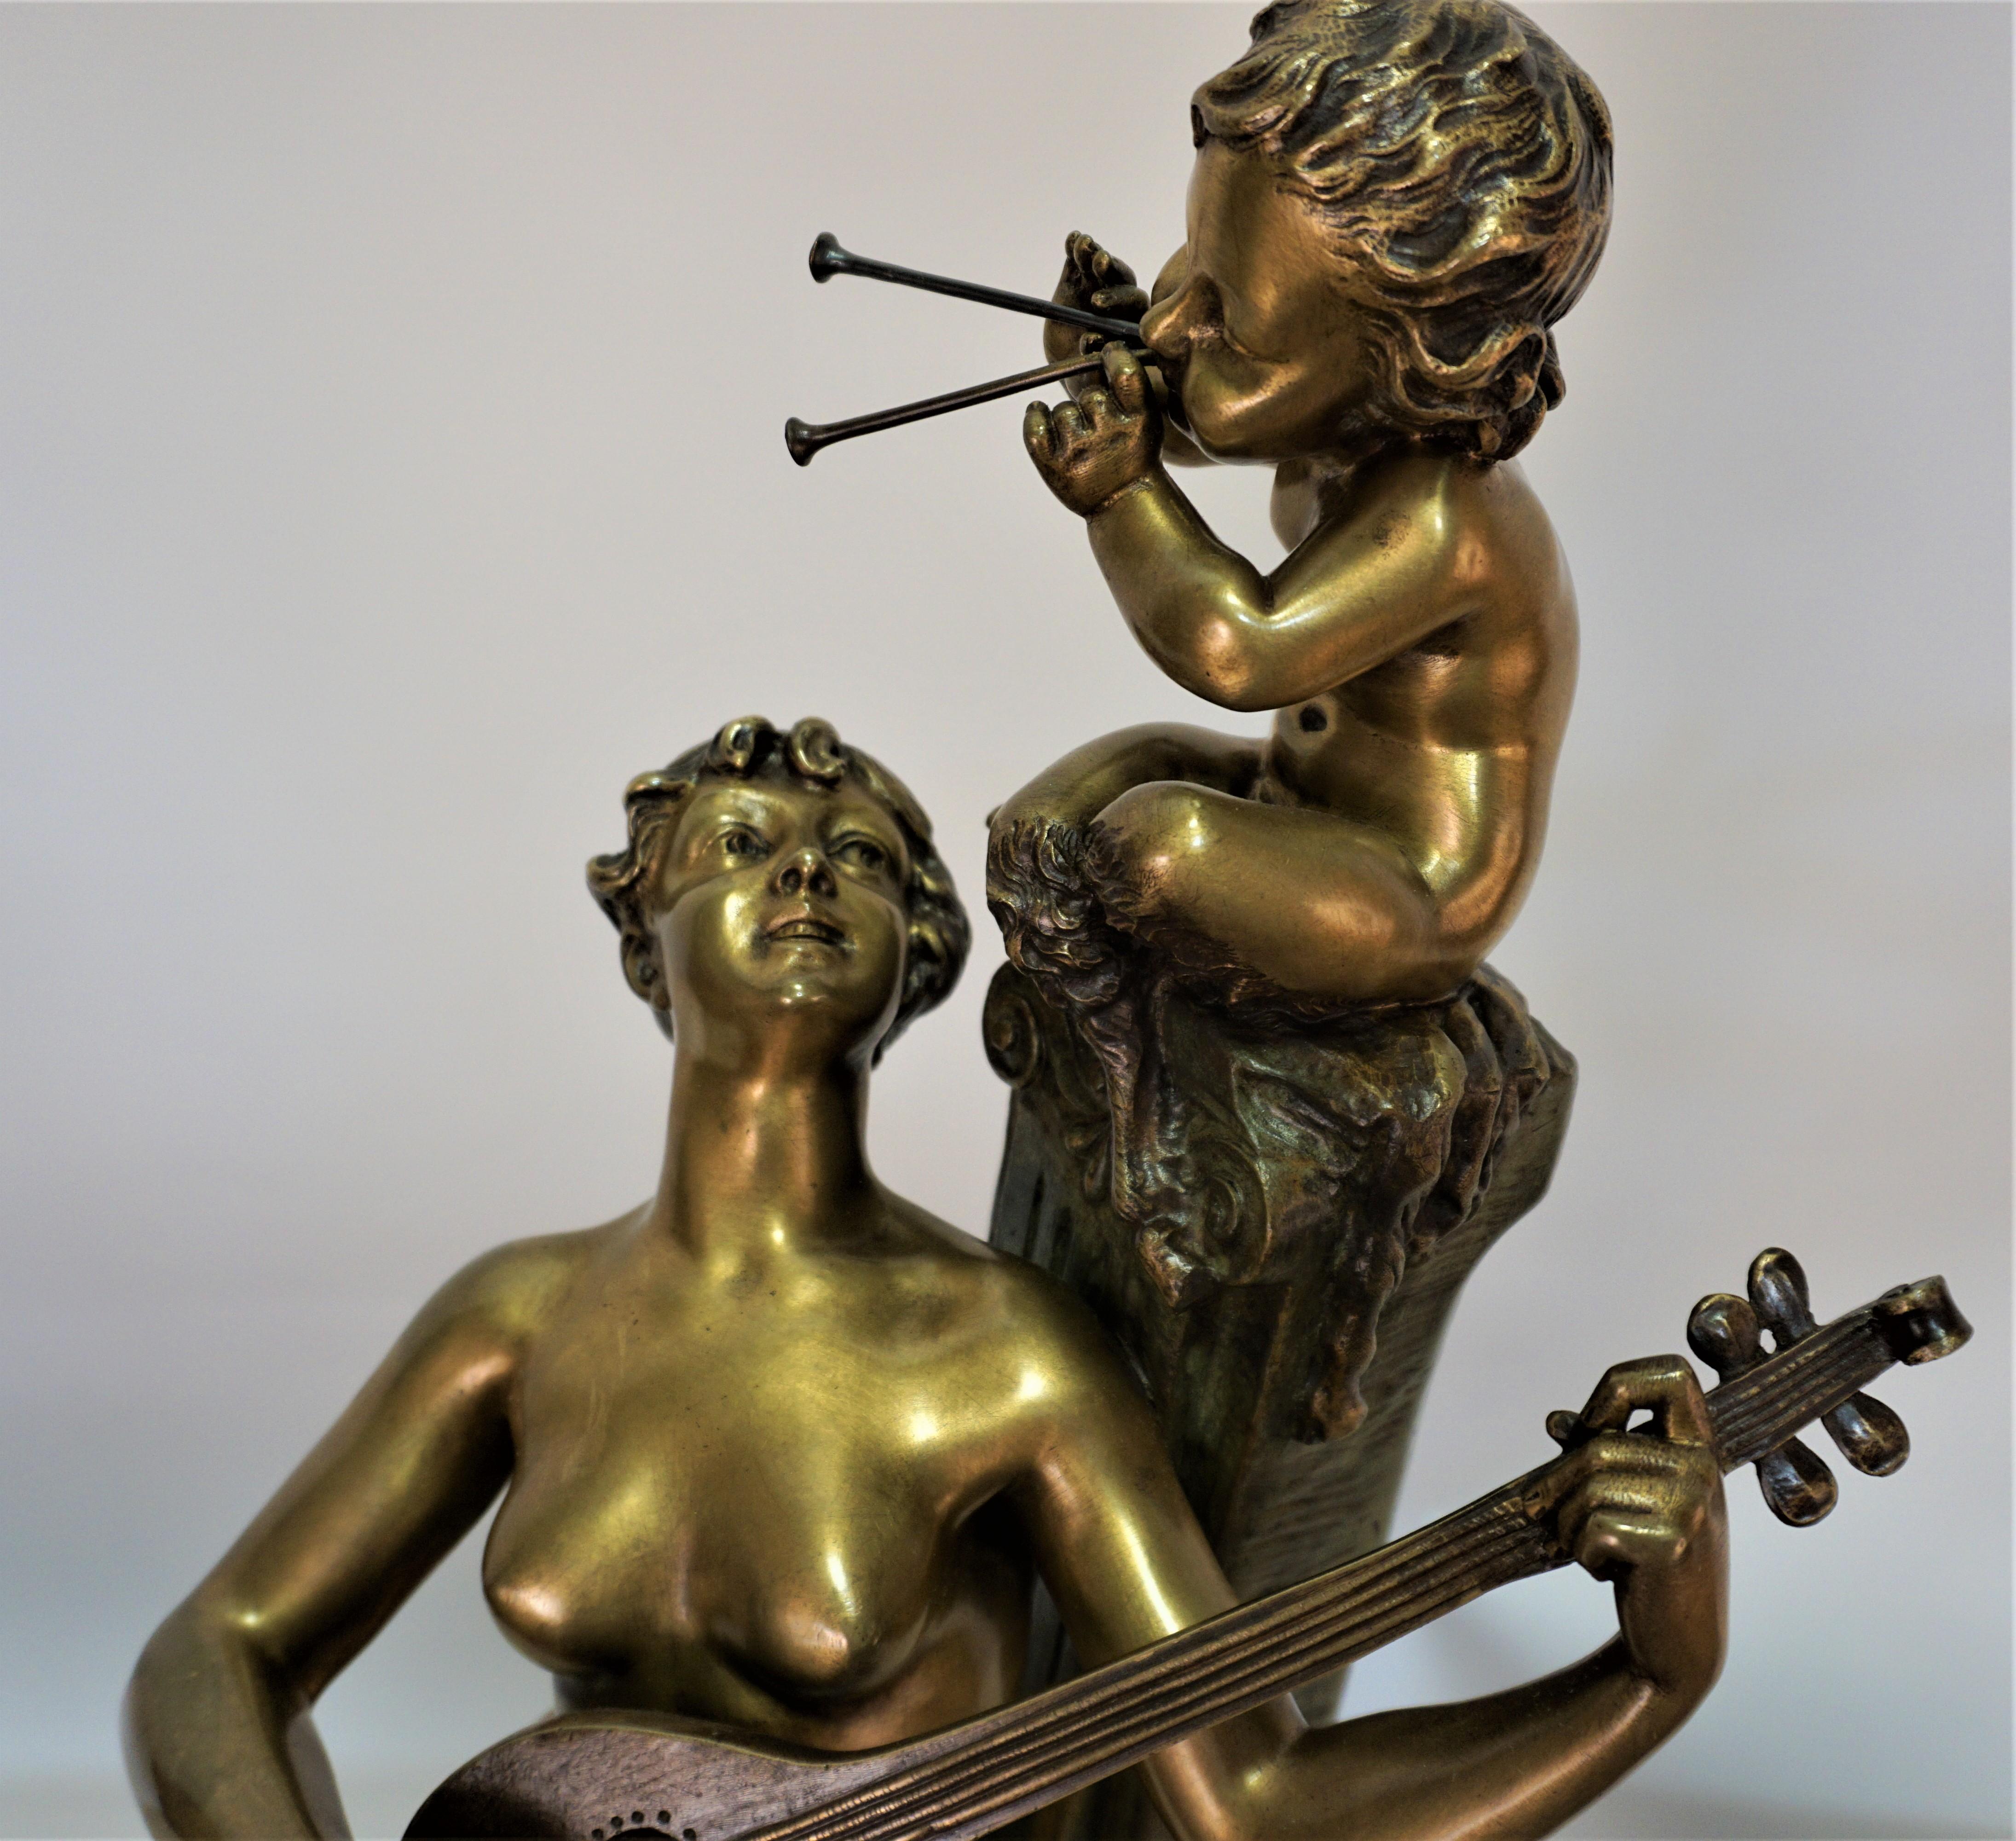 Bronze Bacchante Plying Music with Young Satyr by Aristide De Ranieri 1865-1929 In Good Condition For Sale In Fairfax, VA